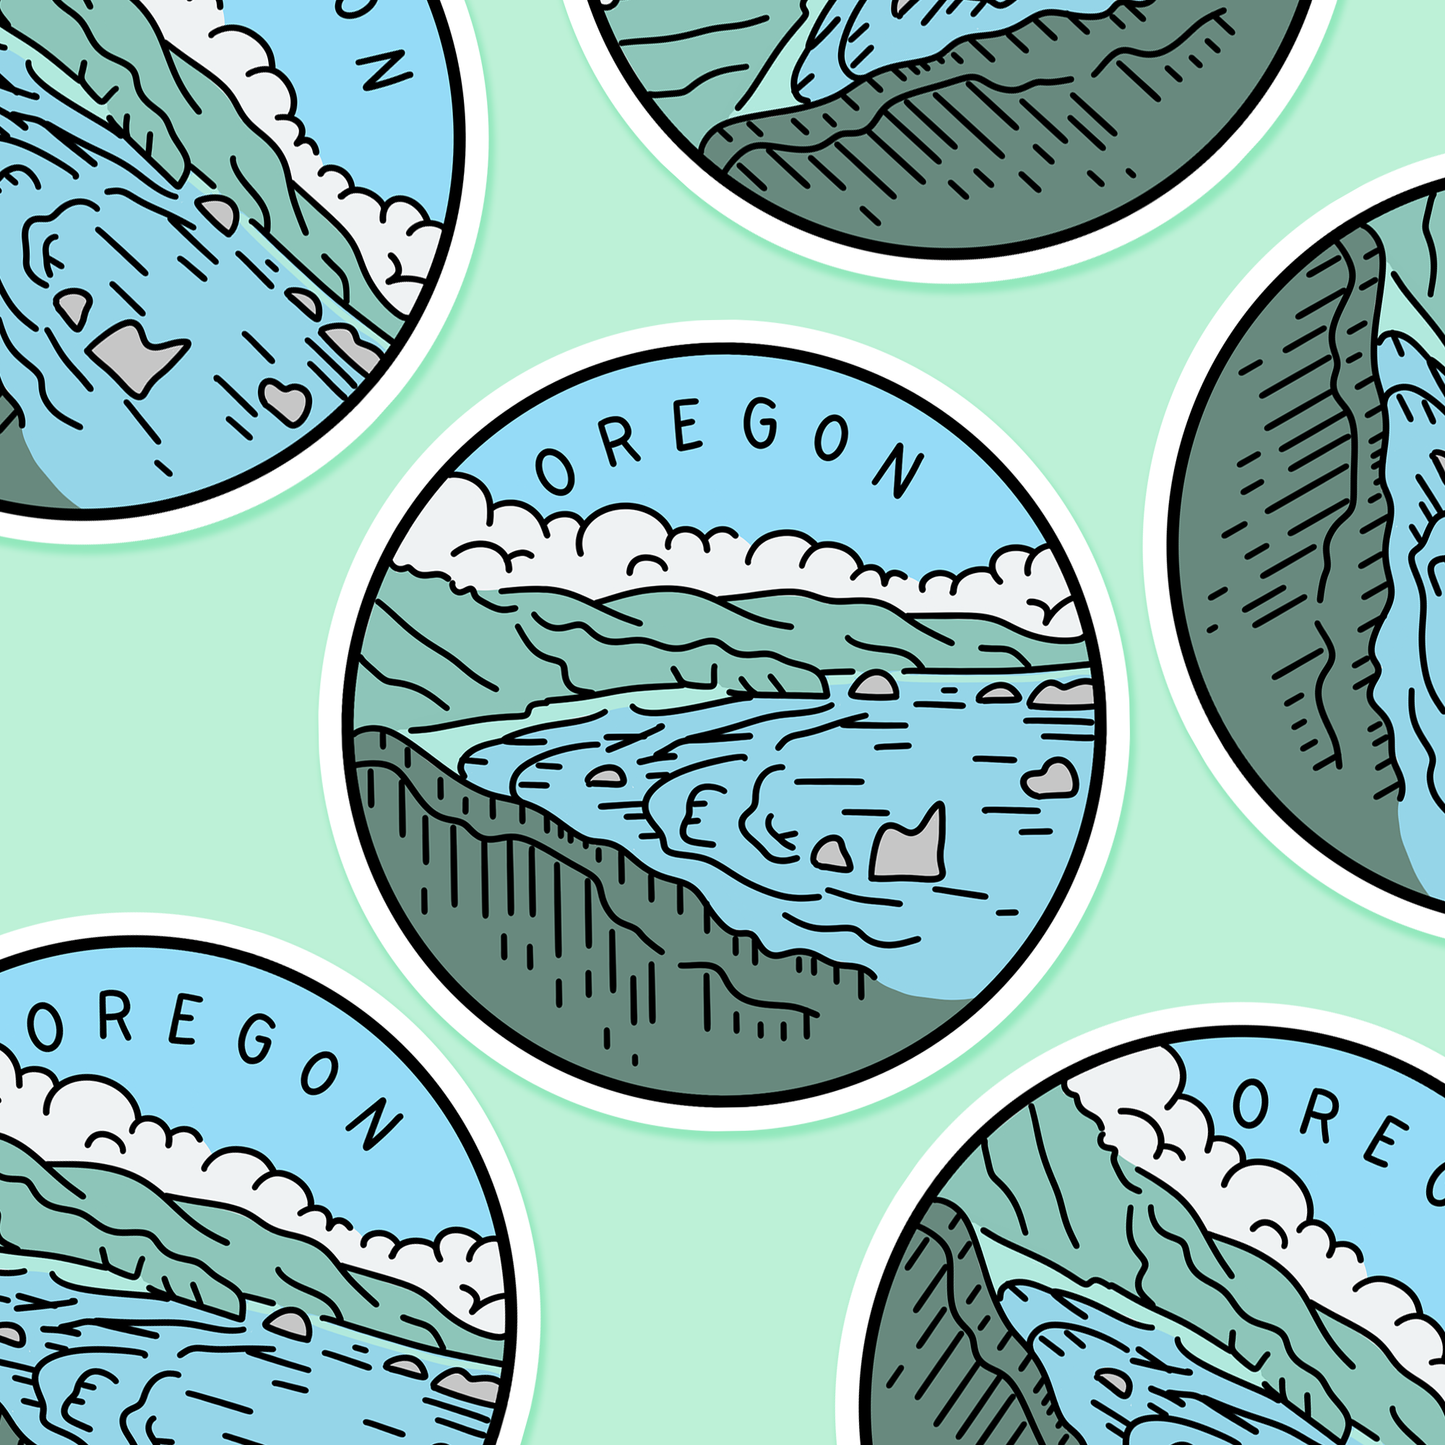 Oregon Illustrated US State 3 x 3 in - Travel Sticker